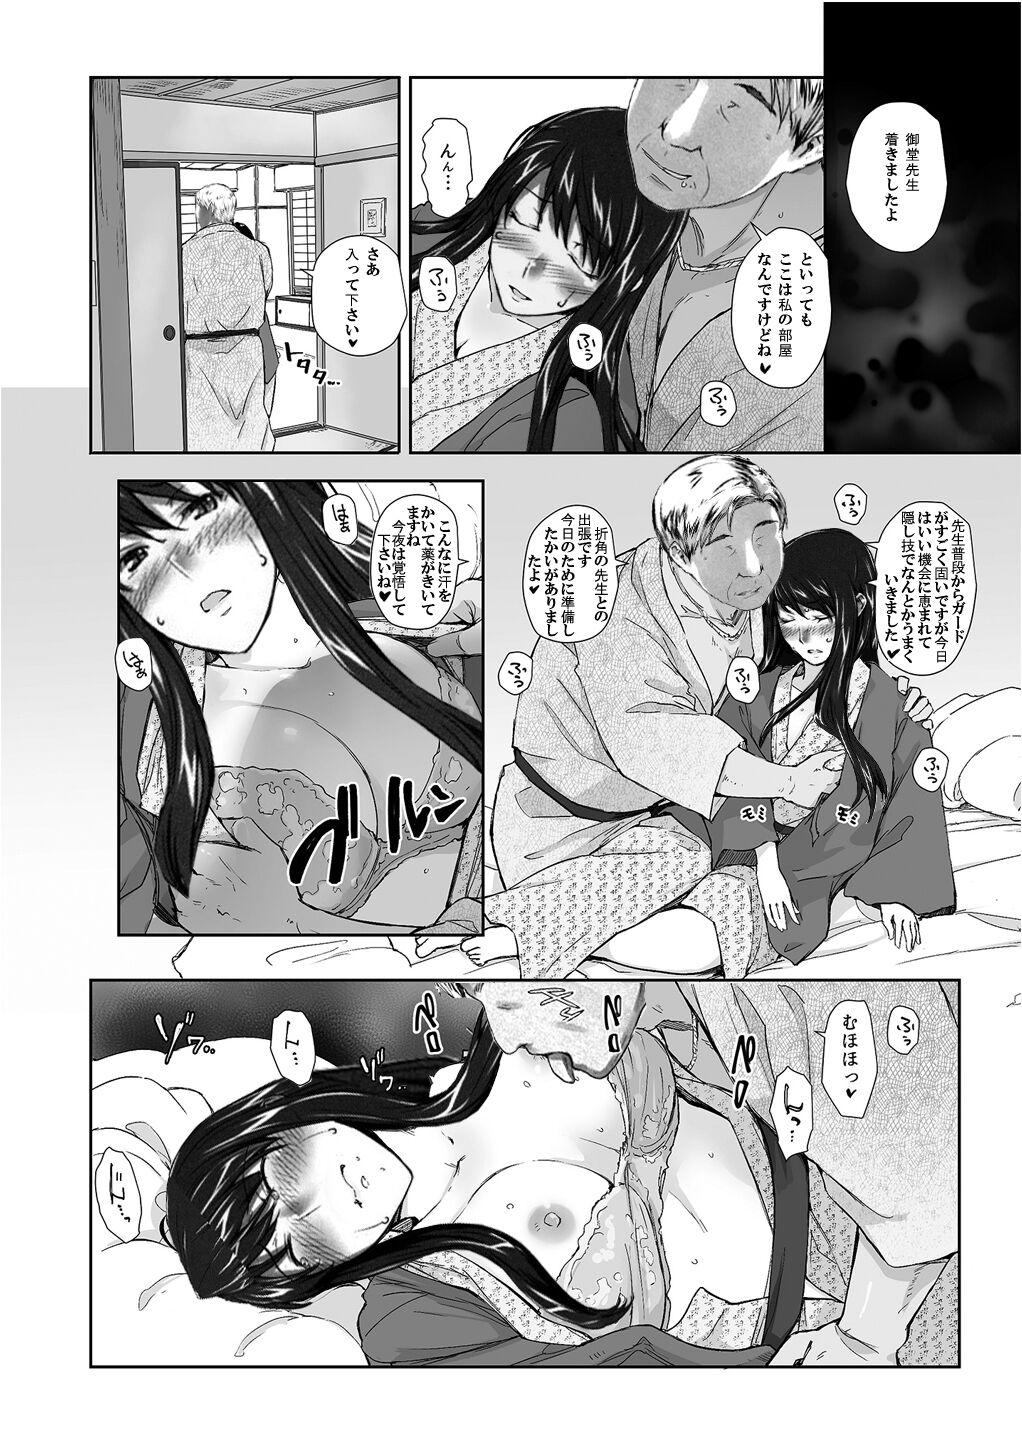 Sakiko-san in delusion Vol.8 revised ~Sakiko-san's circumstance at an educational training Route3~ (collage) (Continue to “First day of study trip” (page 42) of Vol.1) 5